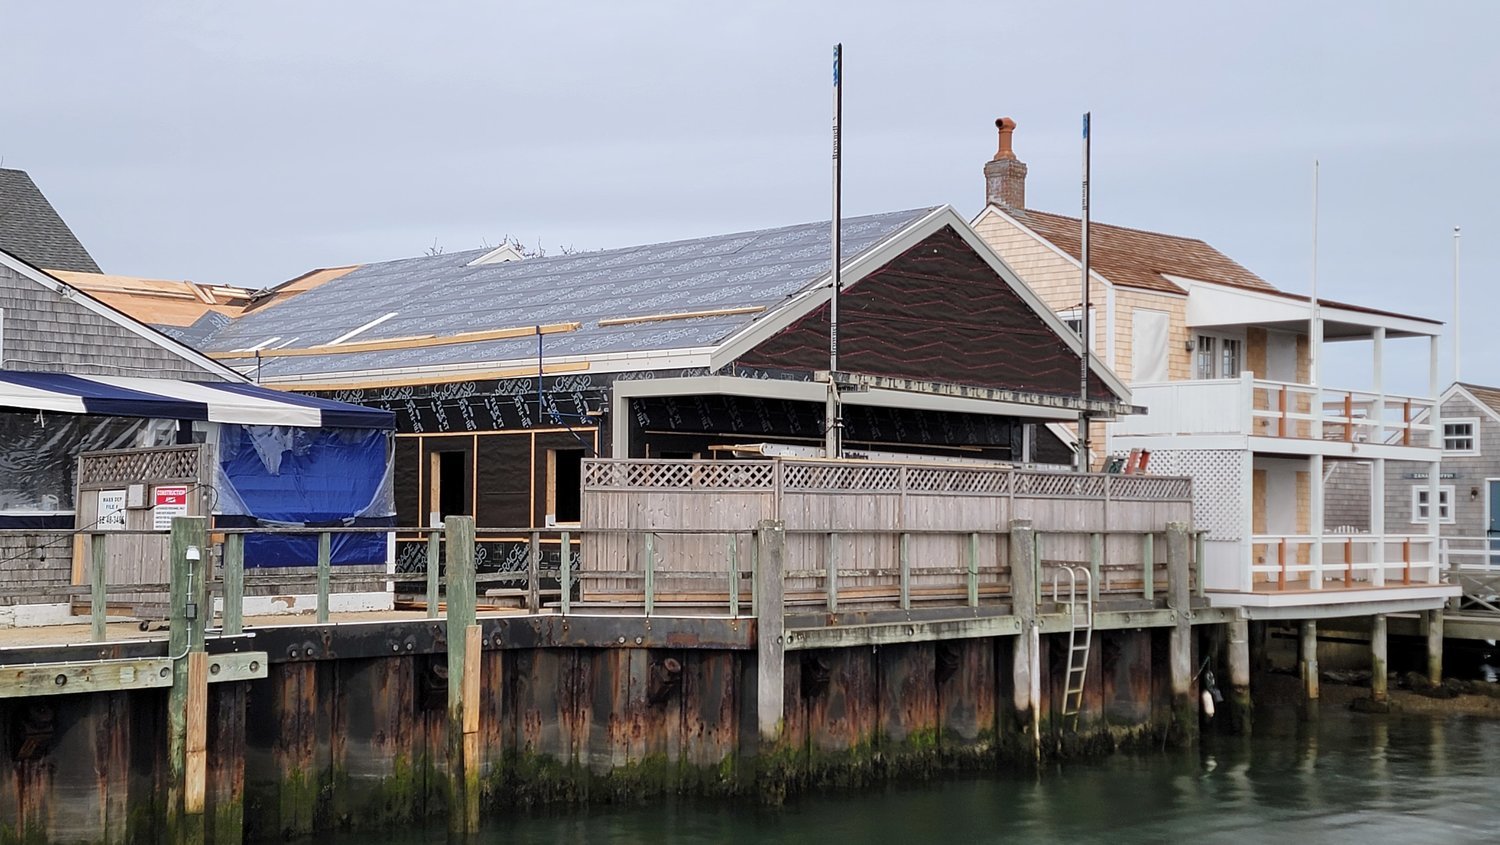 The waterfront property being converted into the Straight Wharf Fish Market seafood restaurant.